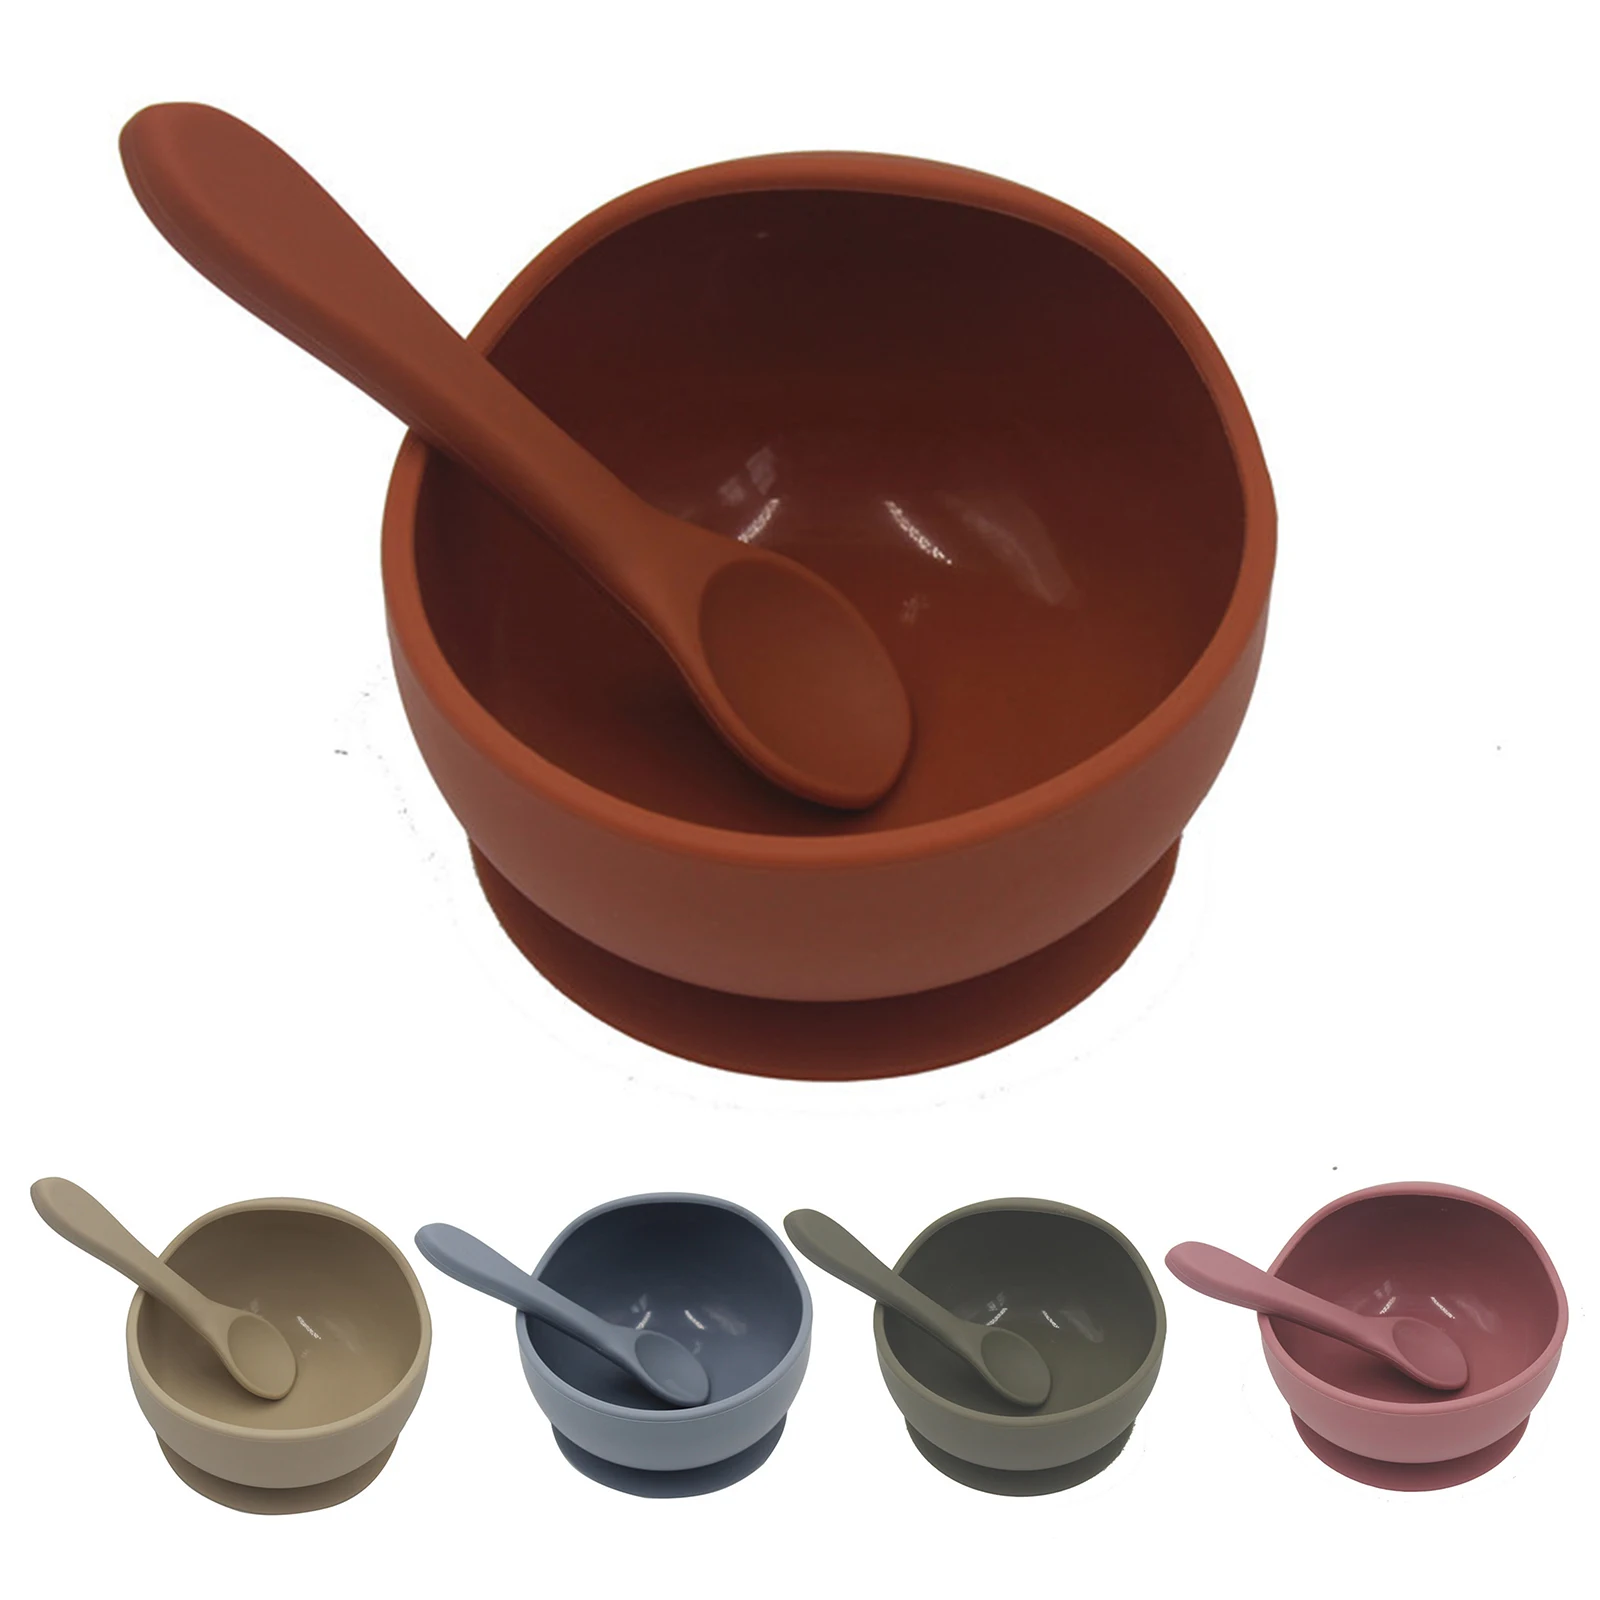 USSE Hot Selling BPA Free 1set Feeding Colour Kids and Babies Learning Dishes Non-Slip  Silicone Suction Bowl & Spoon Set